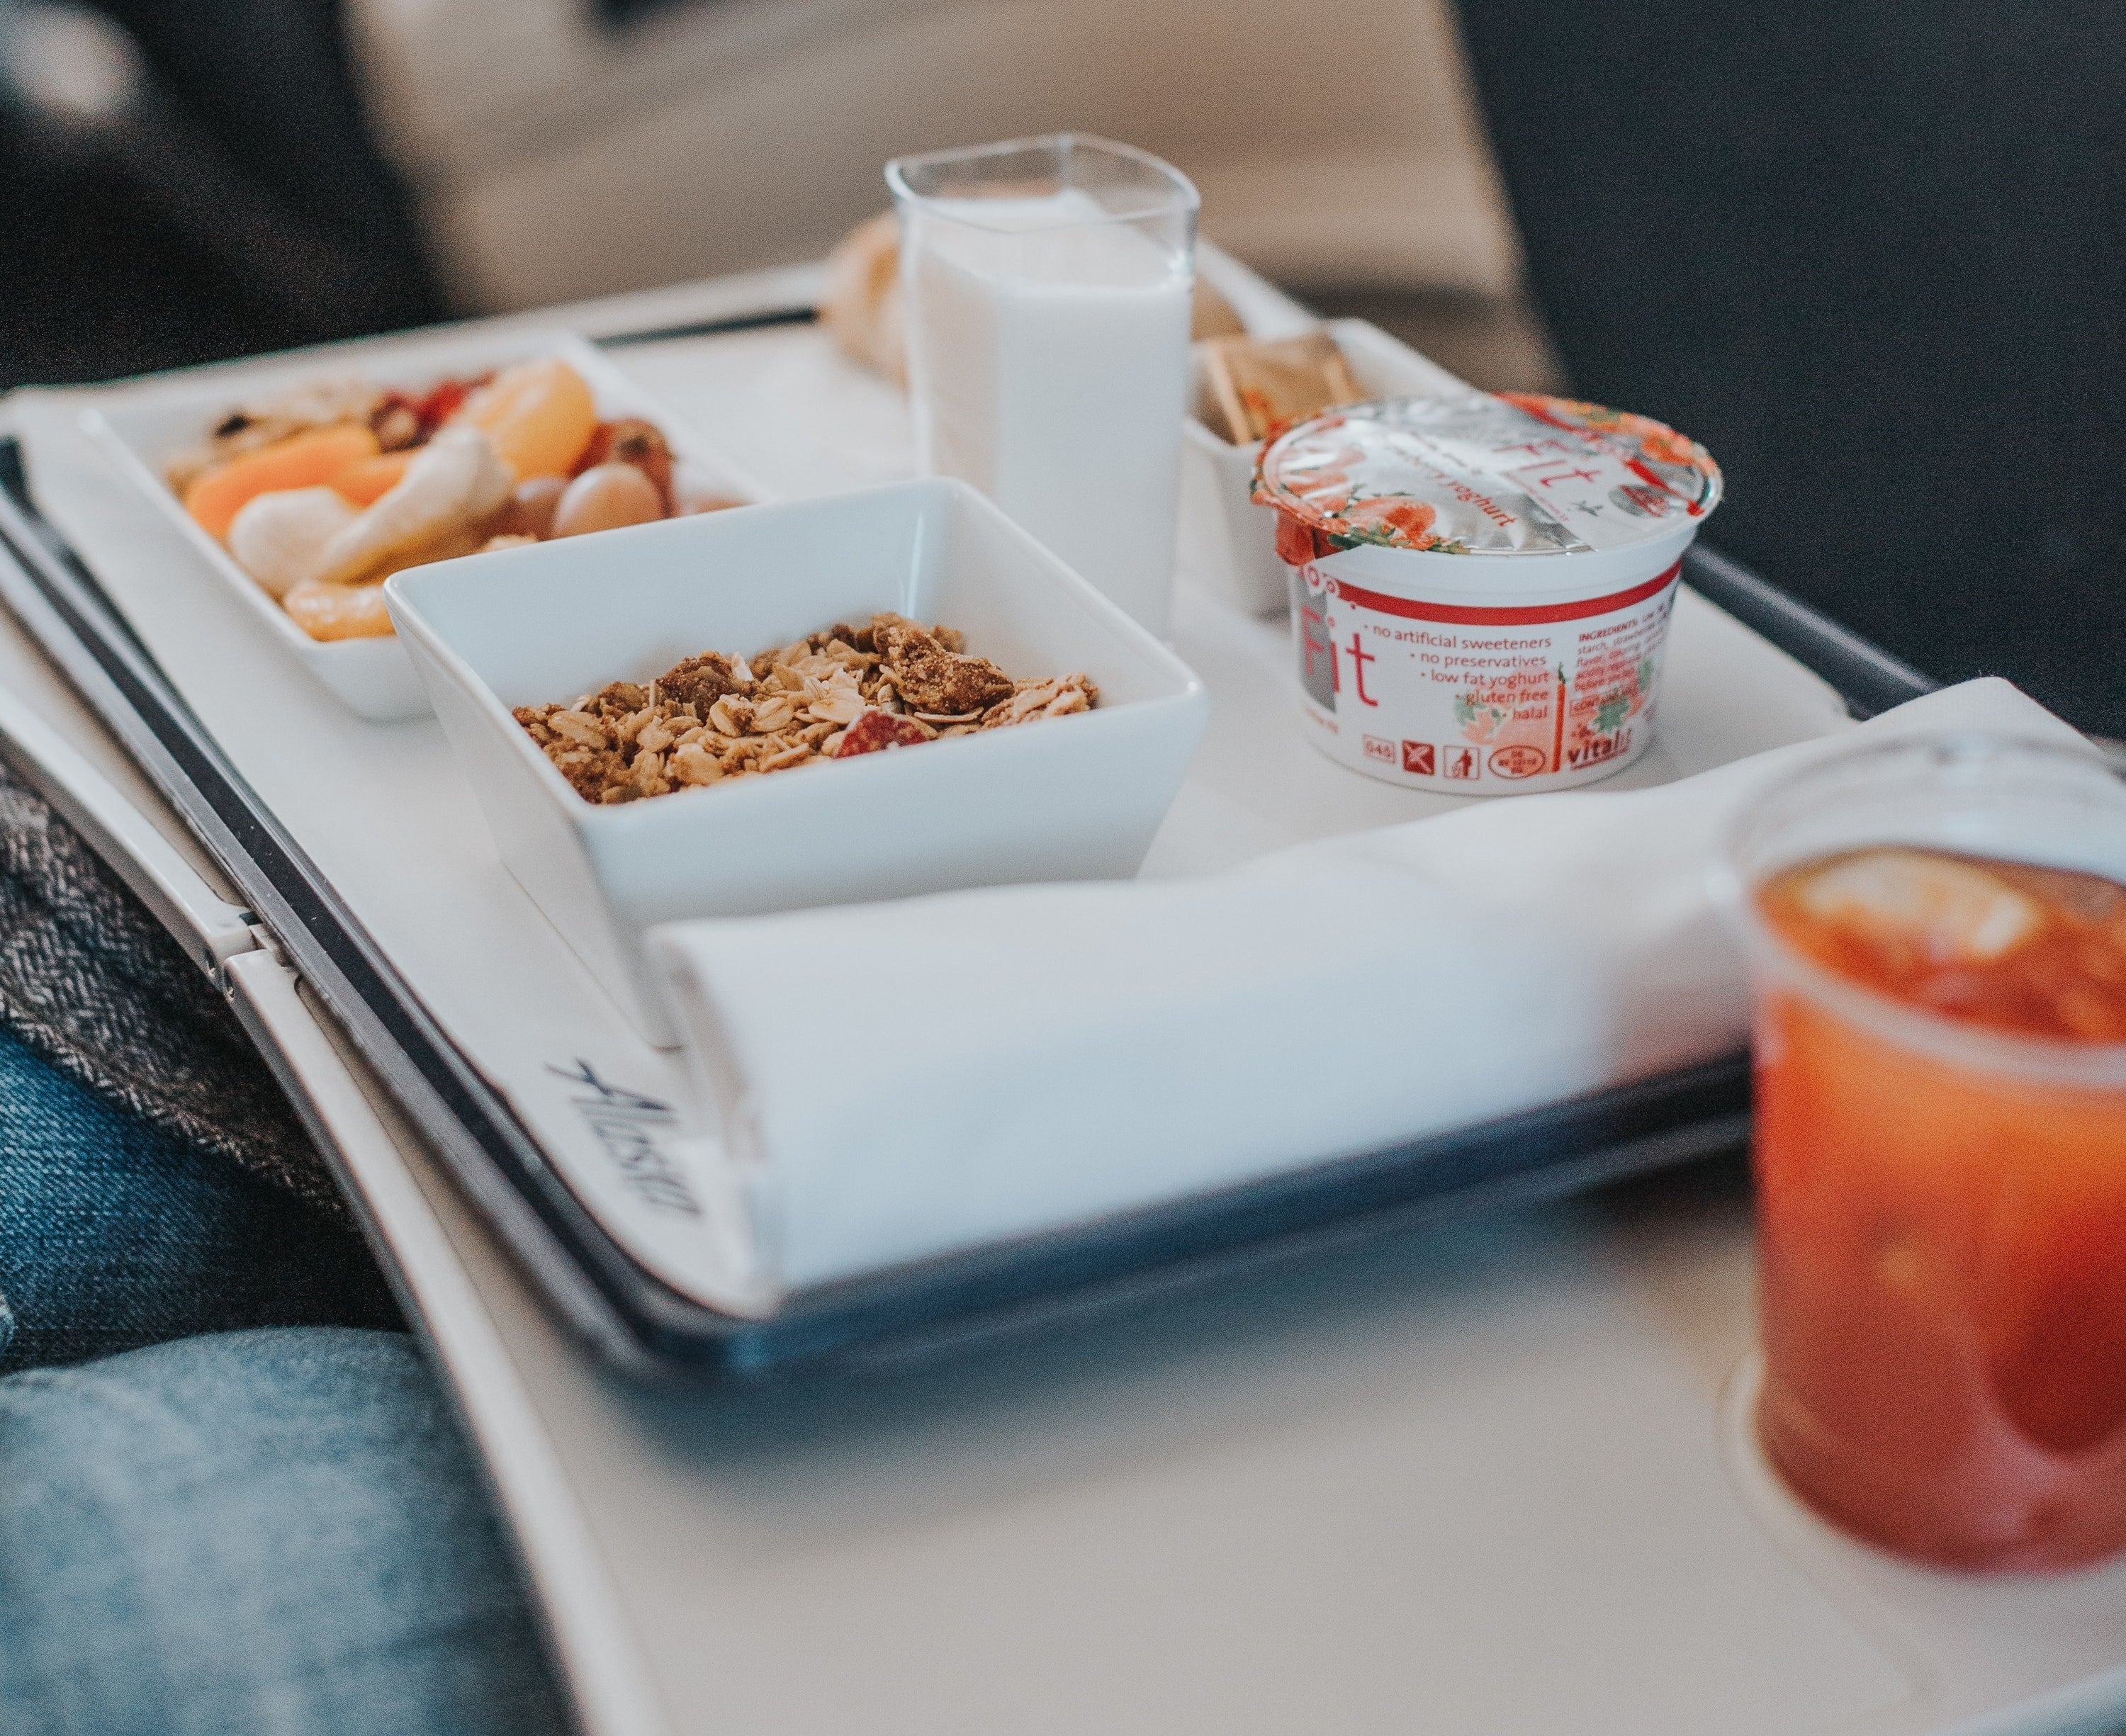 Food kept on a airplane tray